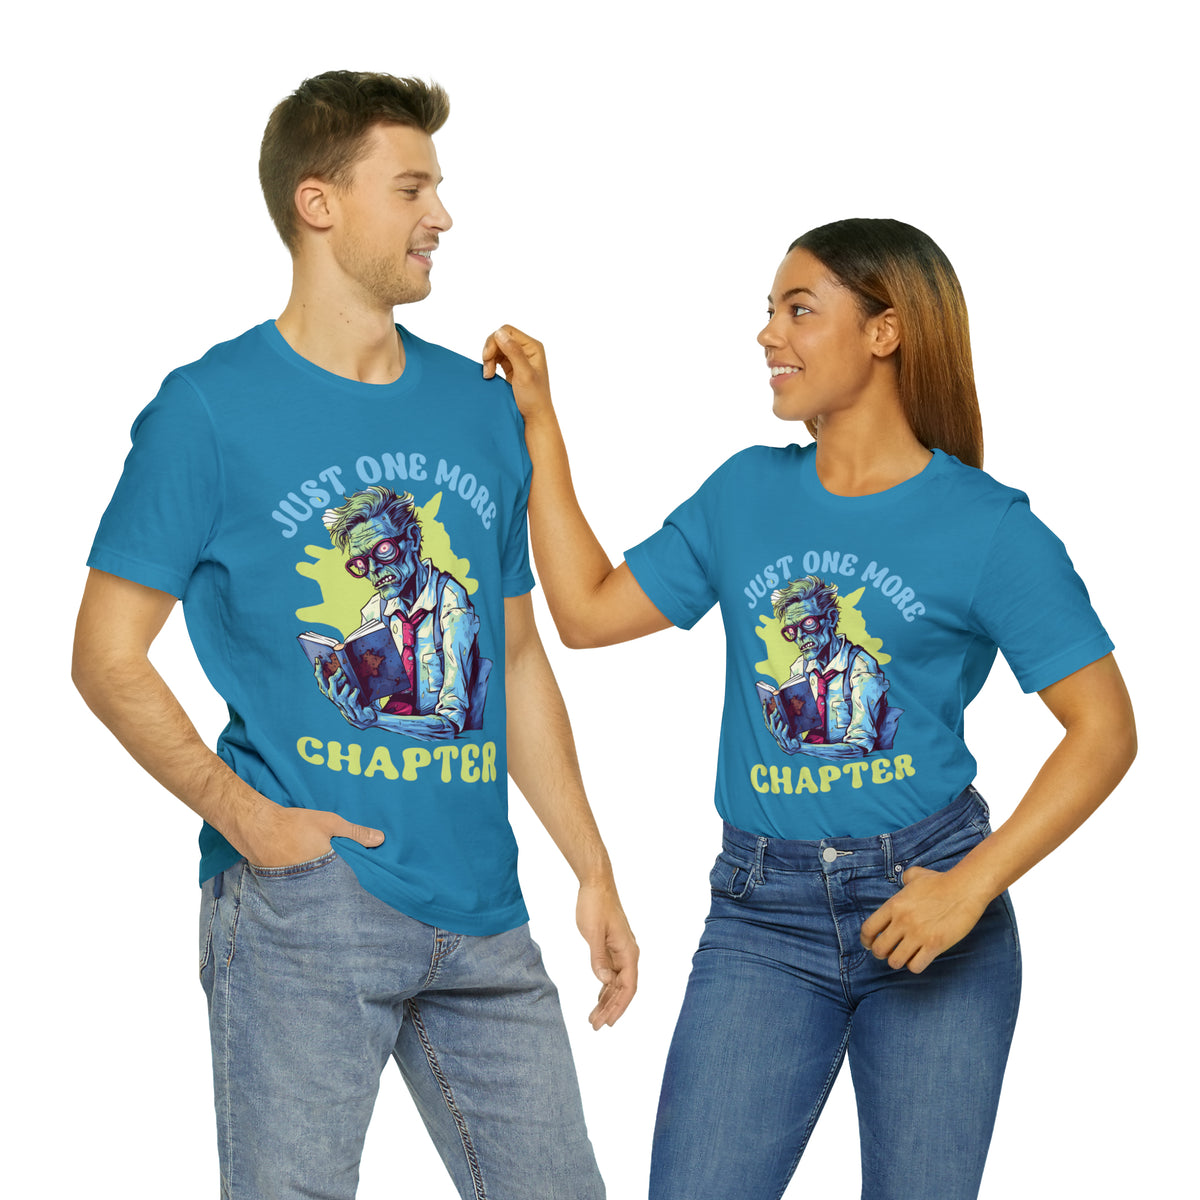 Just One More Chapter Zombie Shirt | Halloween Book Shirt | Book Lover shirt | Book Lover Gift | Unisex Jersey T-shirt